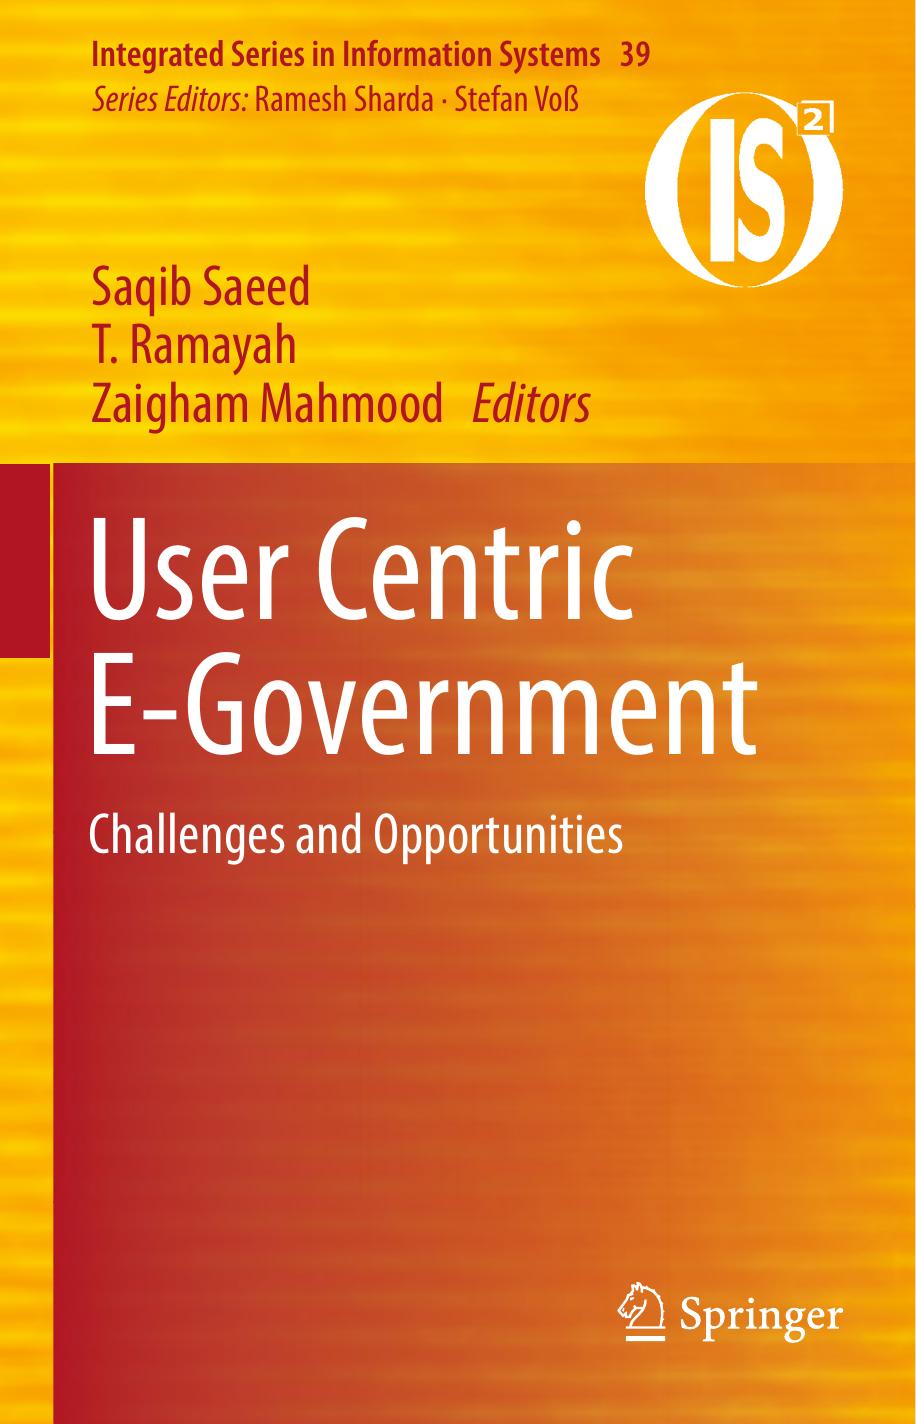 User Centric E-government Challenges and Opportunities 2019